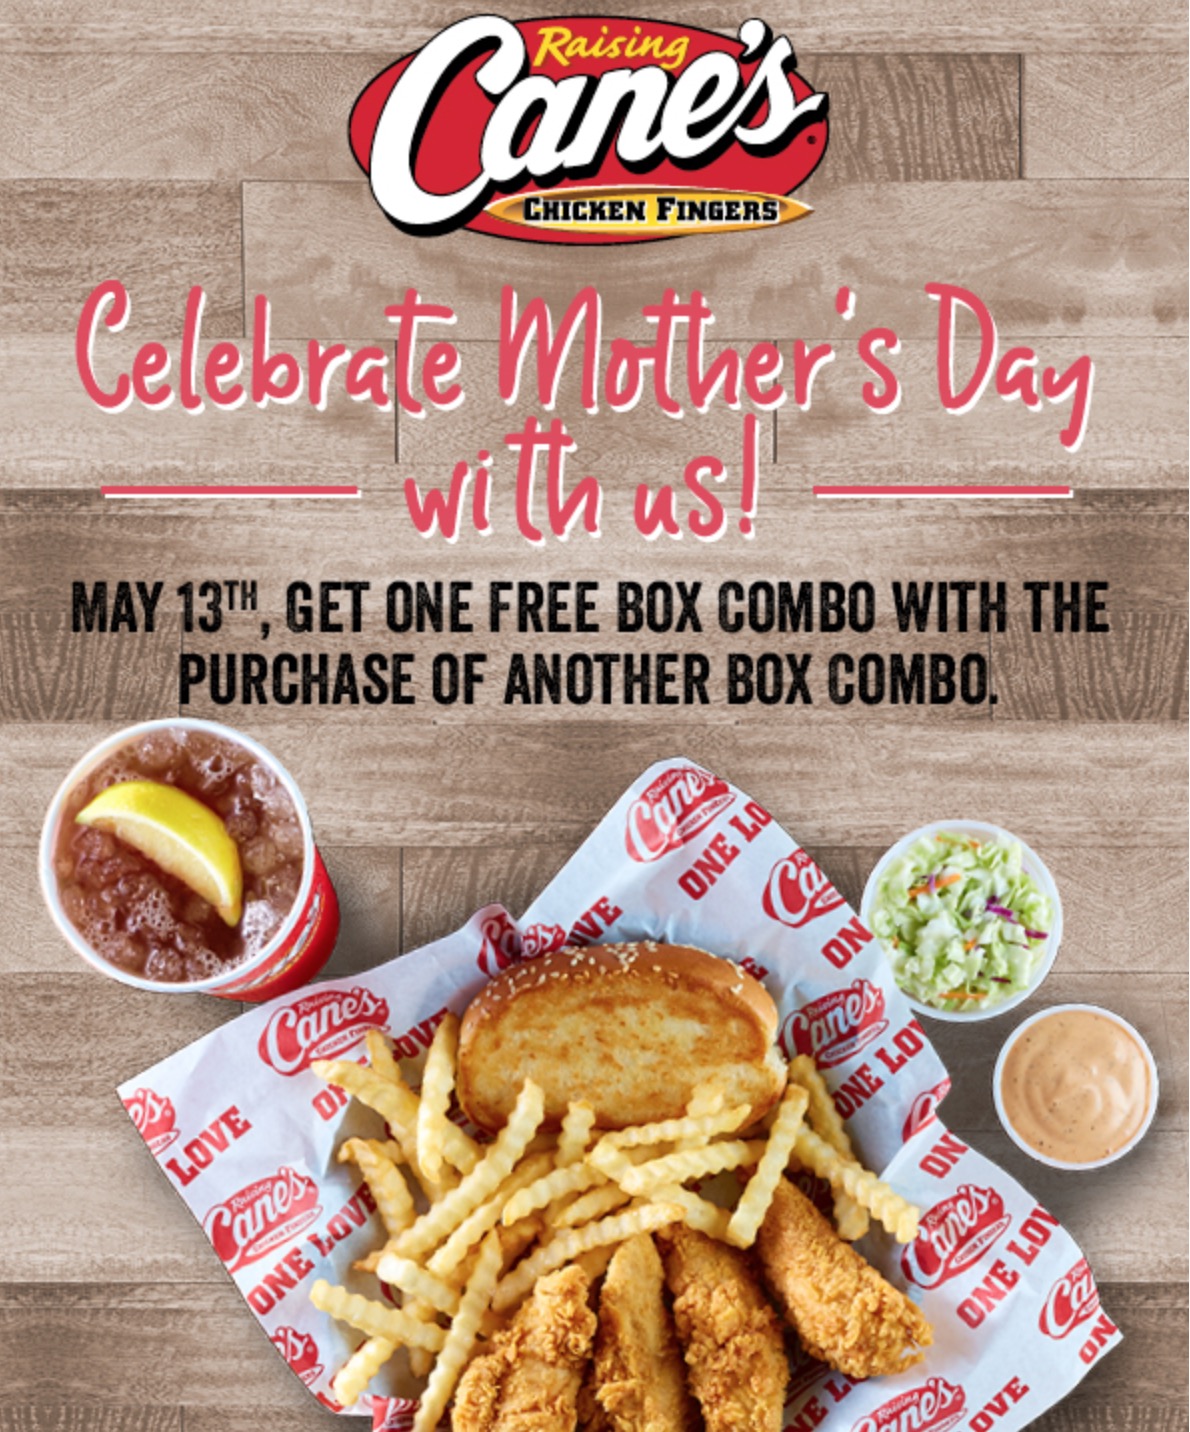 Raising Cane's Chicken Fingers FREE Meal & Mother's Day Offer!